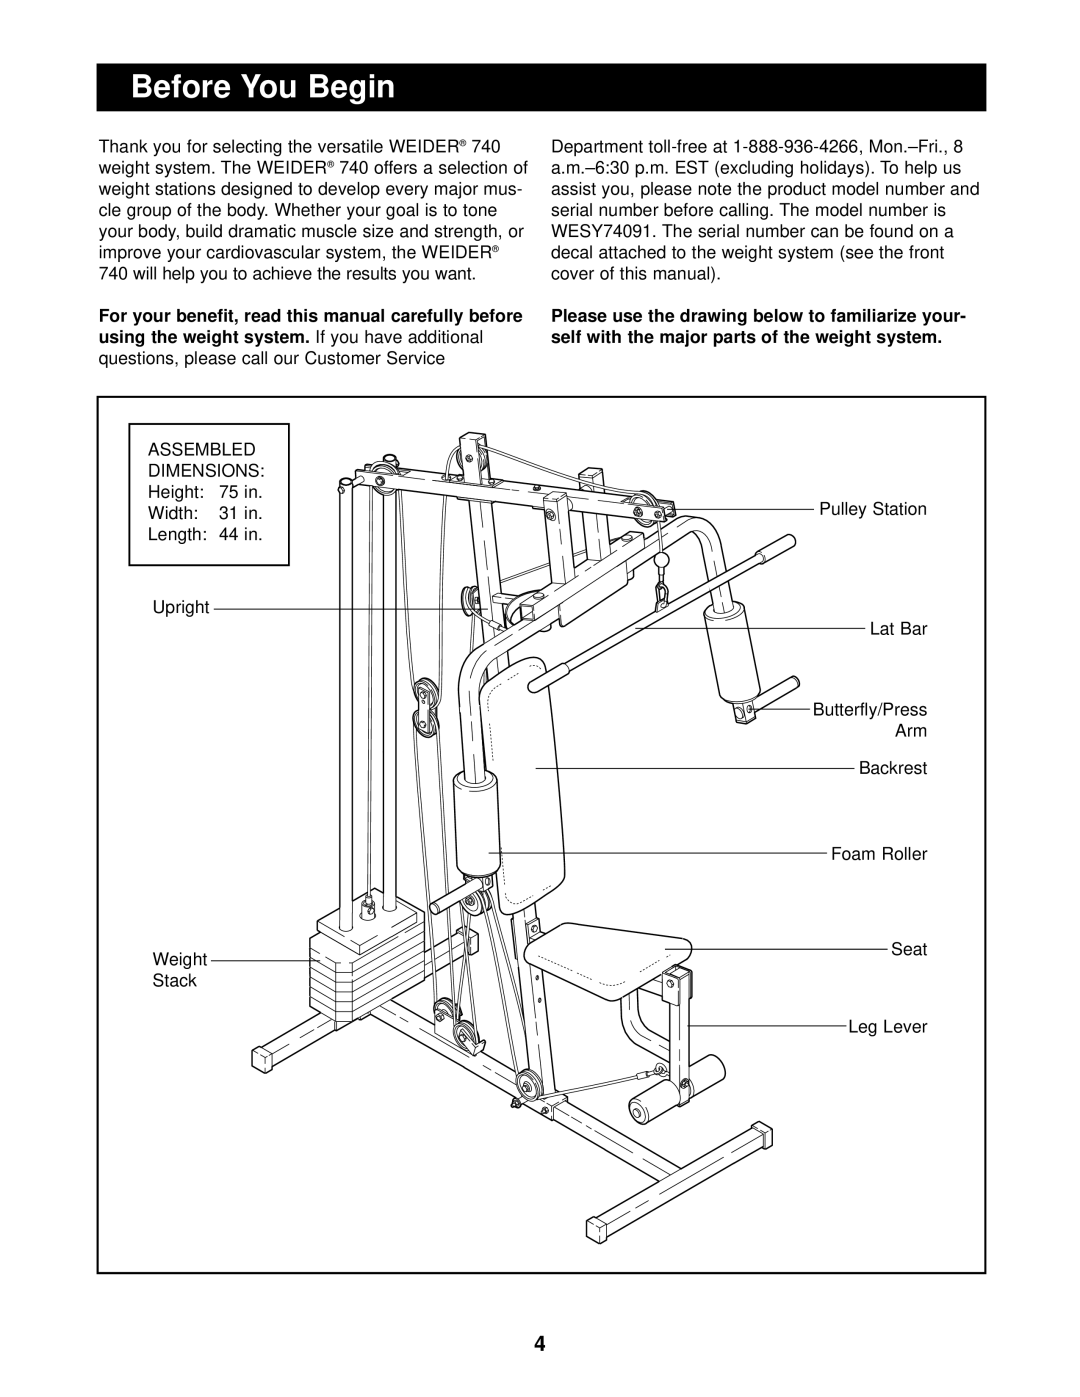 Weider 740 user manual Before You Begin, using the weight system 